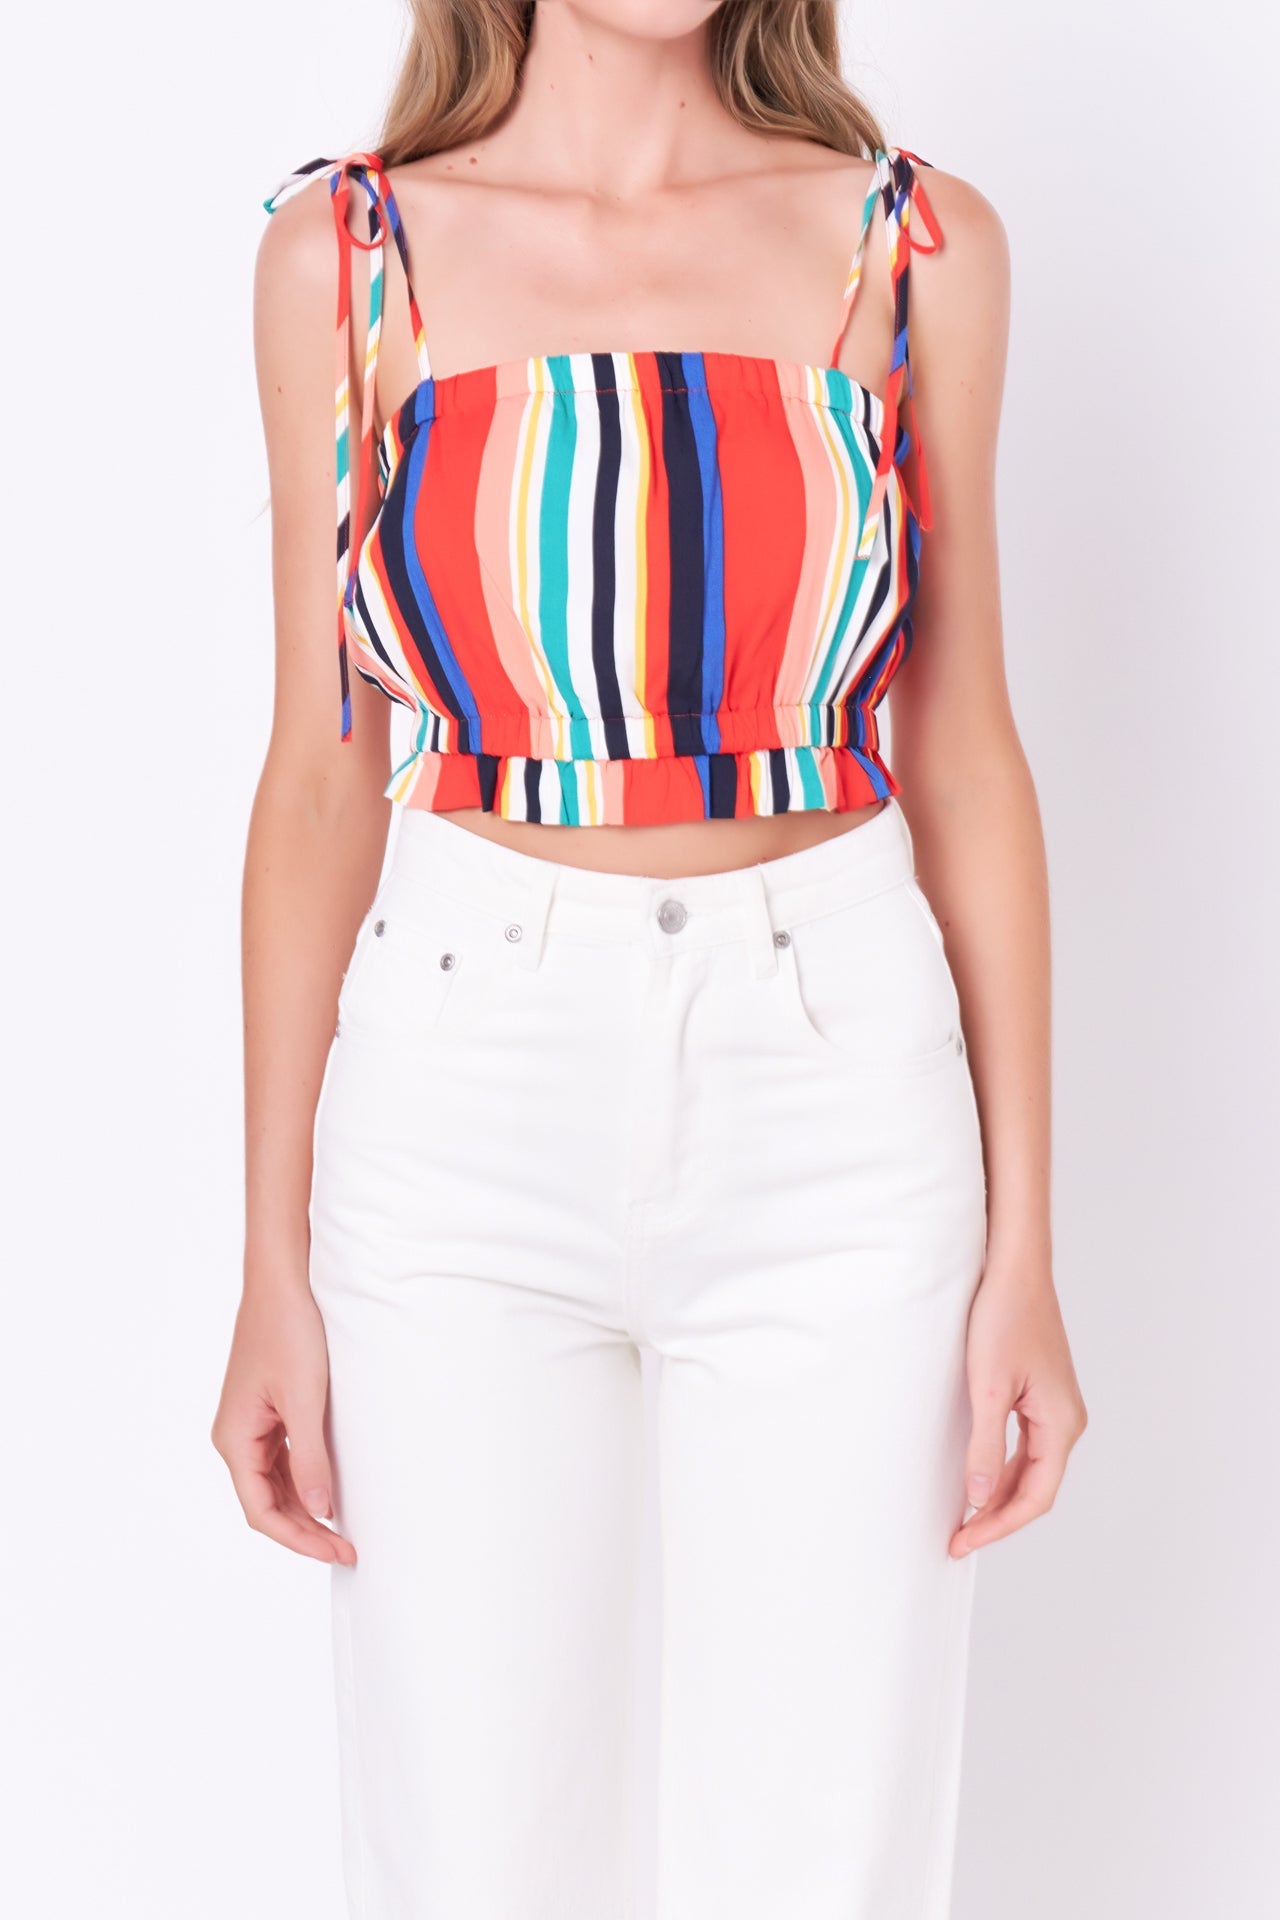 ENGLISH FACTORY - Rainbow Stripe Top with Tie - TOPS available at Objectrare